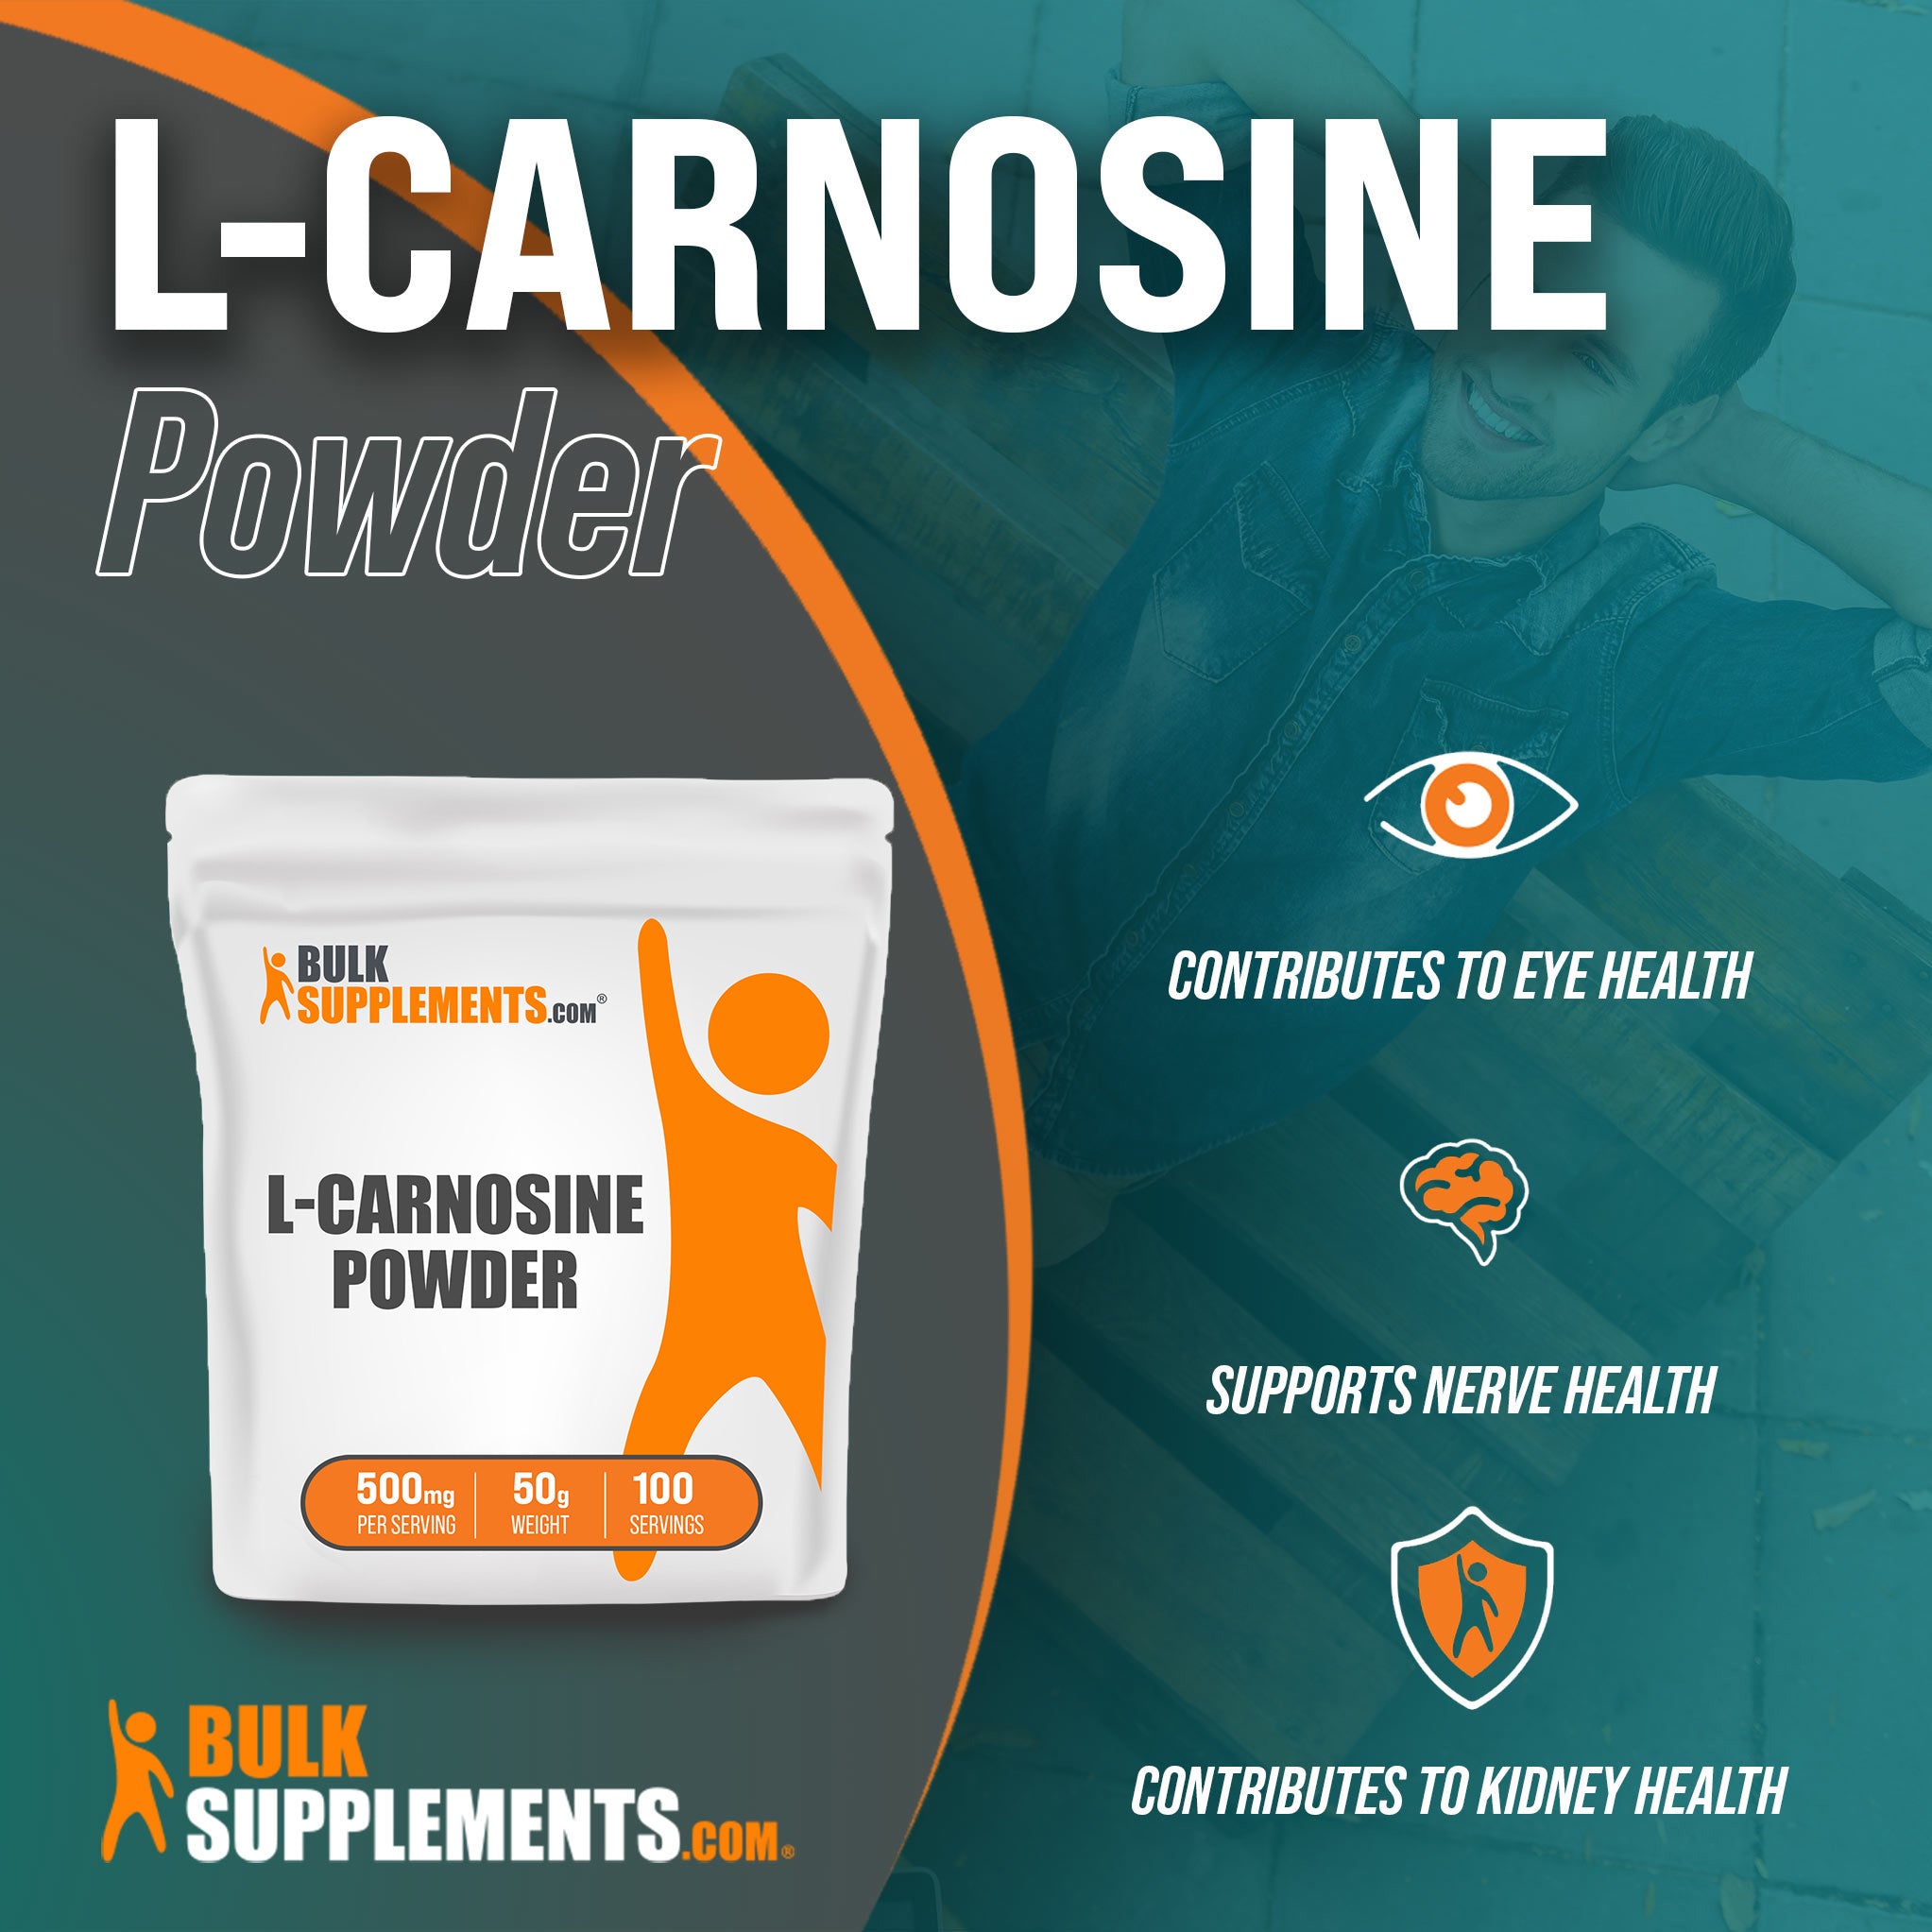 Benefits of L-Carnosine: contributes to eye health, supports nerve health, contributes to kidney health